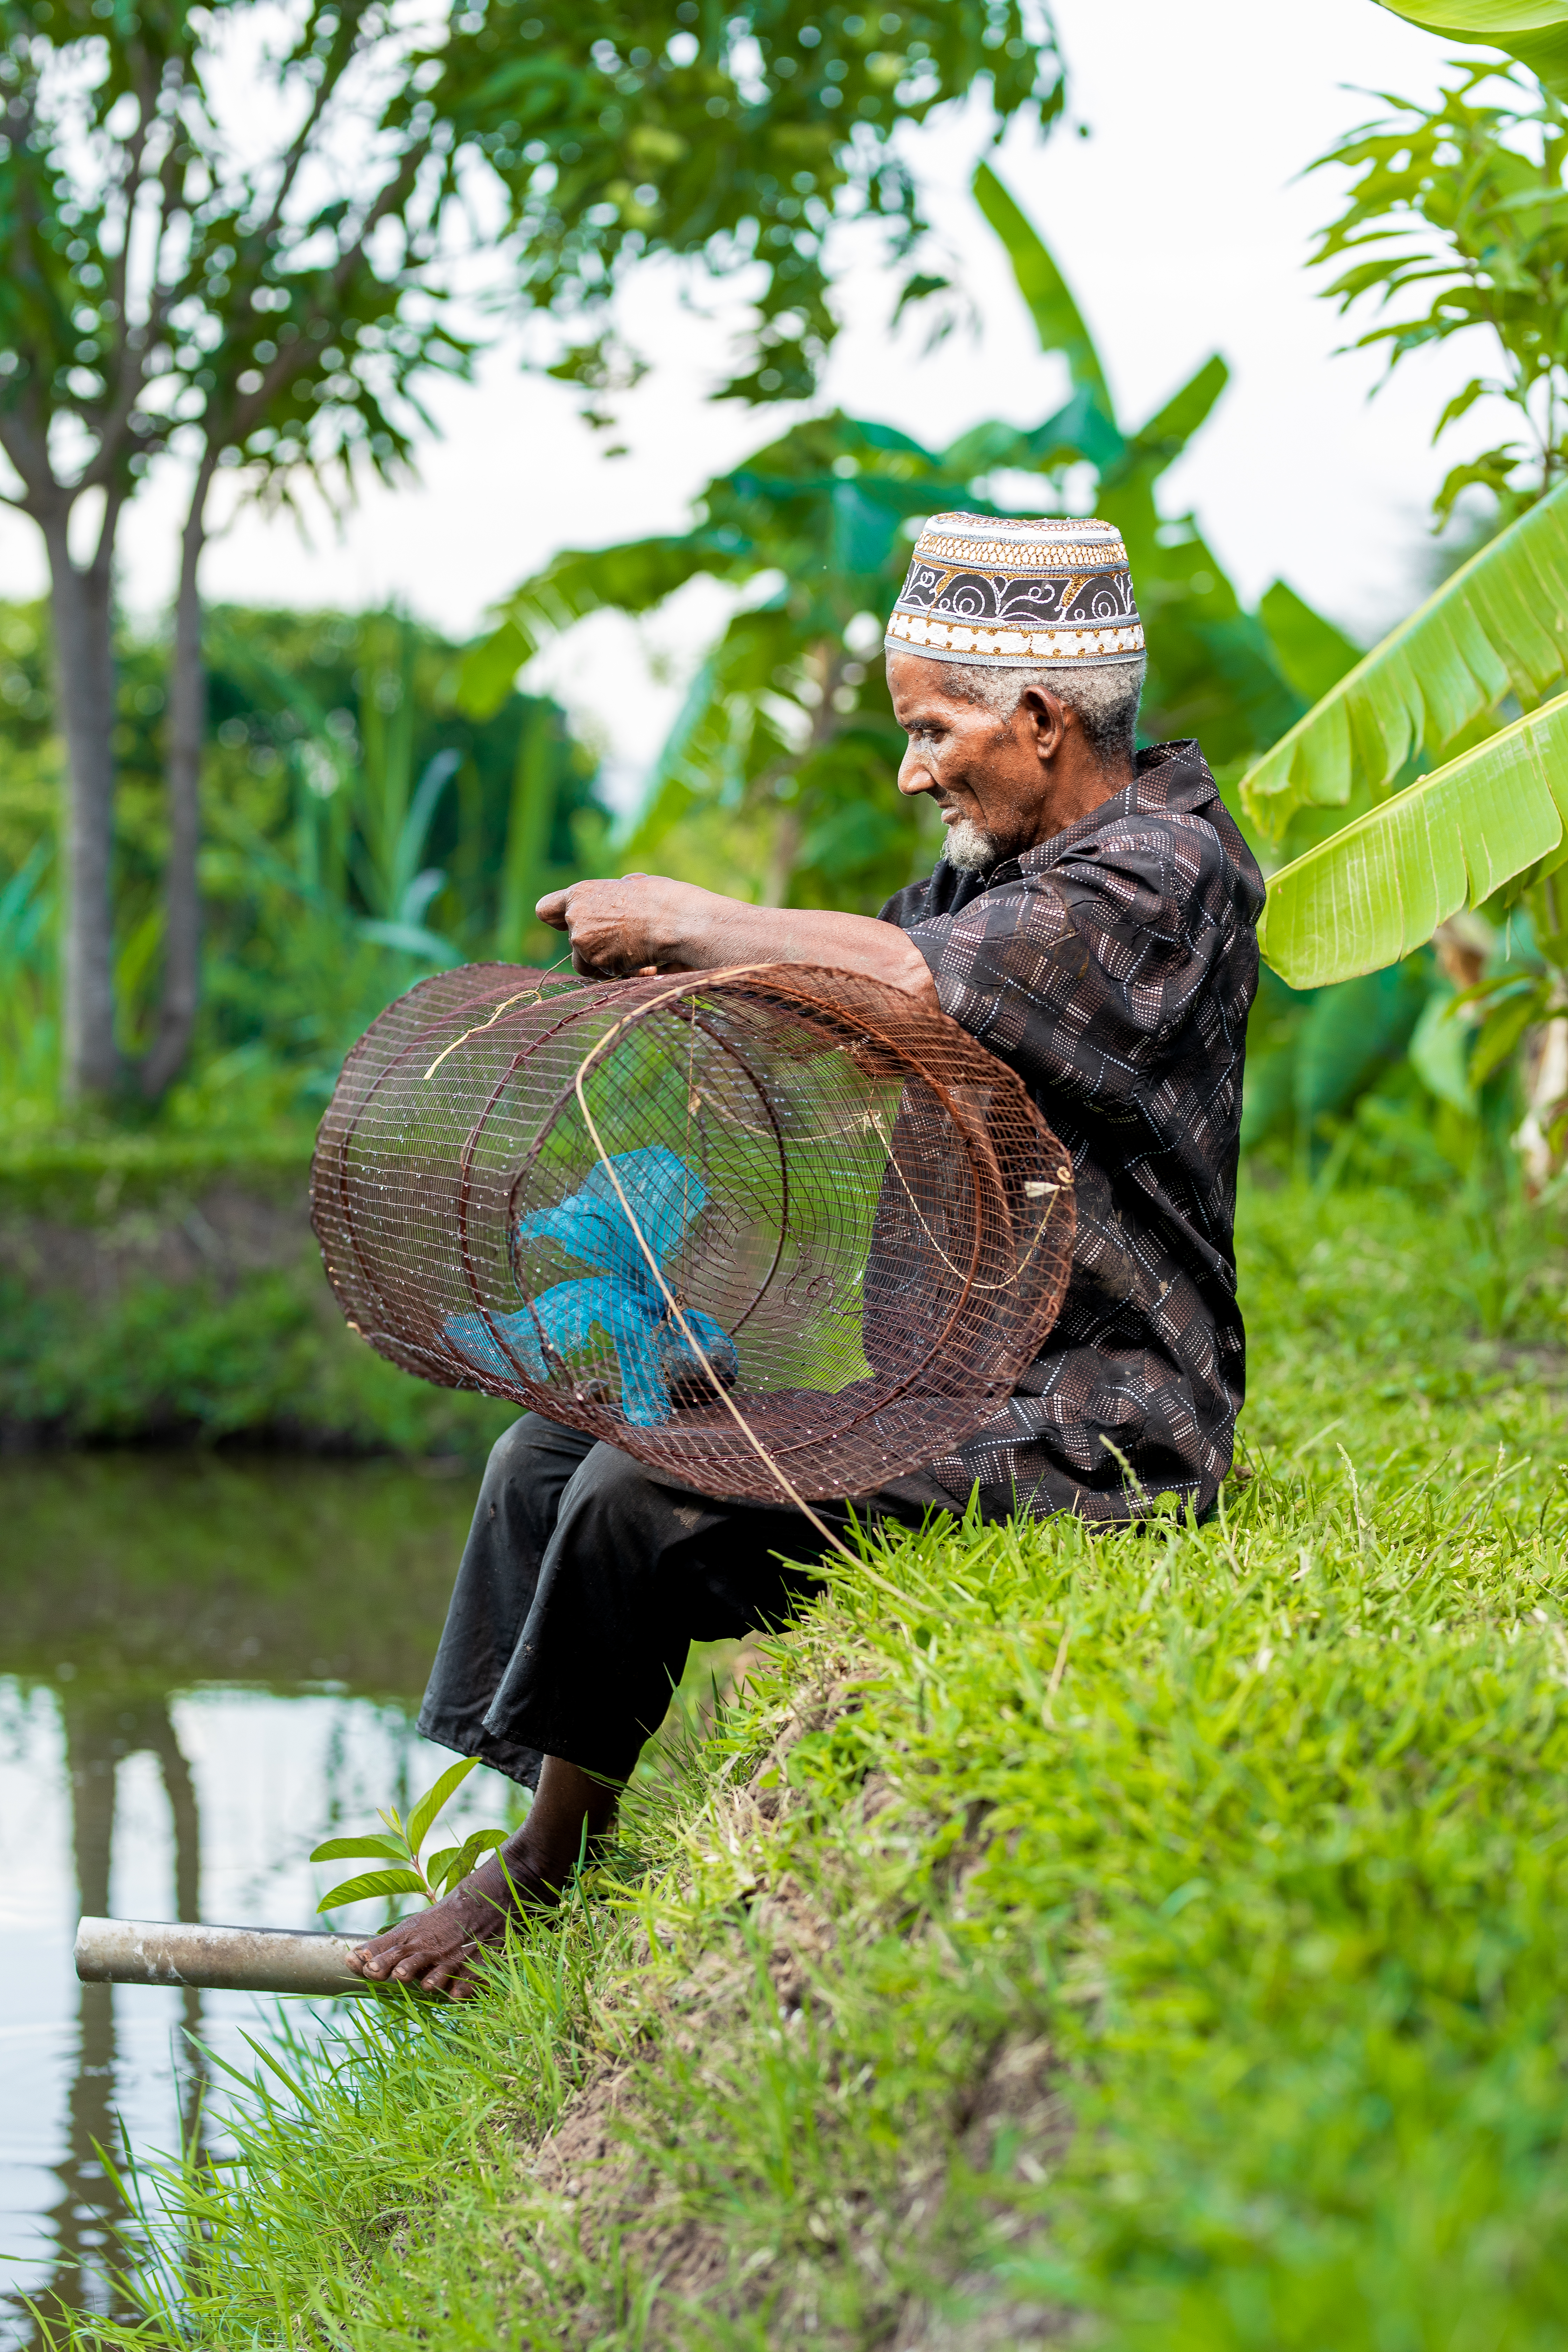 Man preparing the fish trap at the shore of a pond